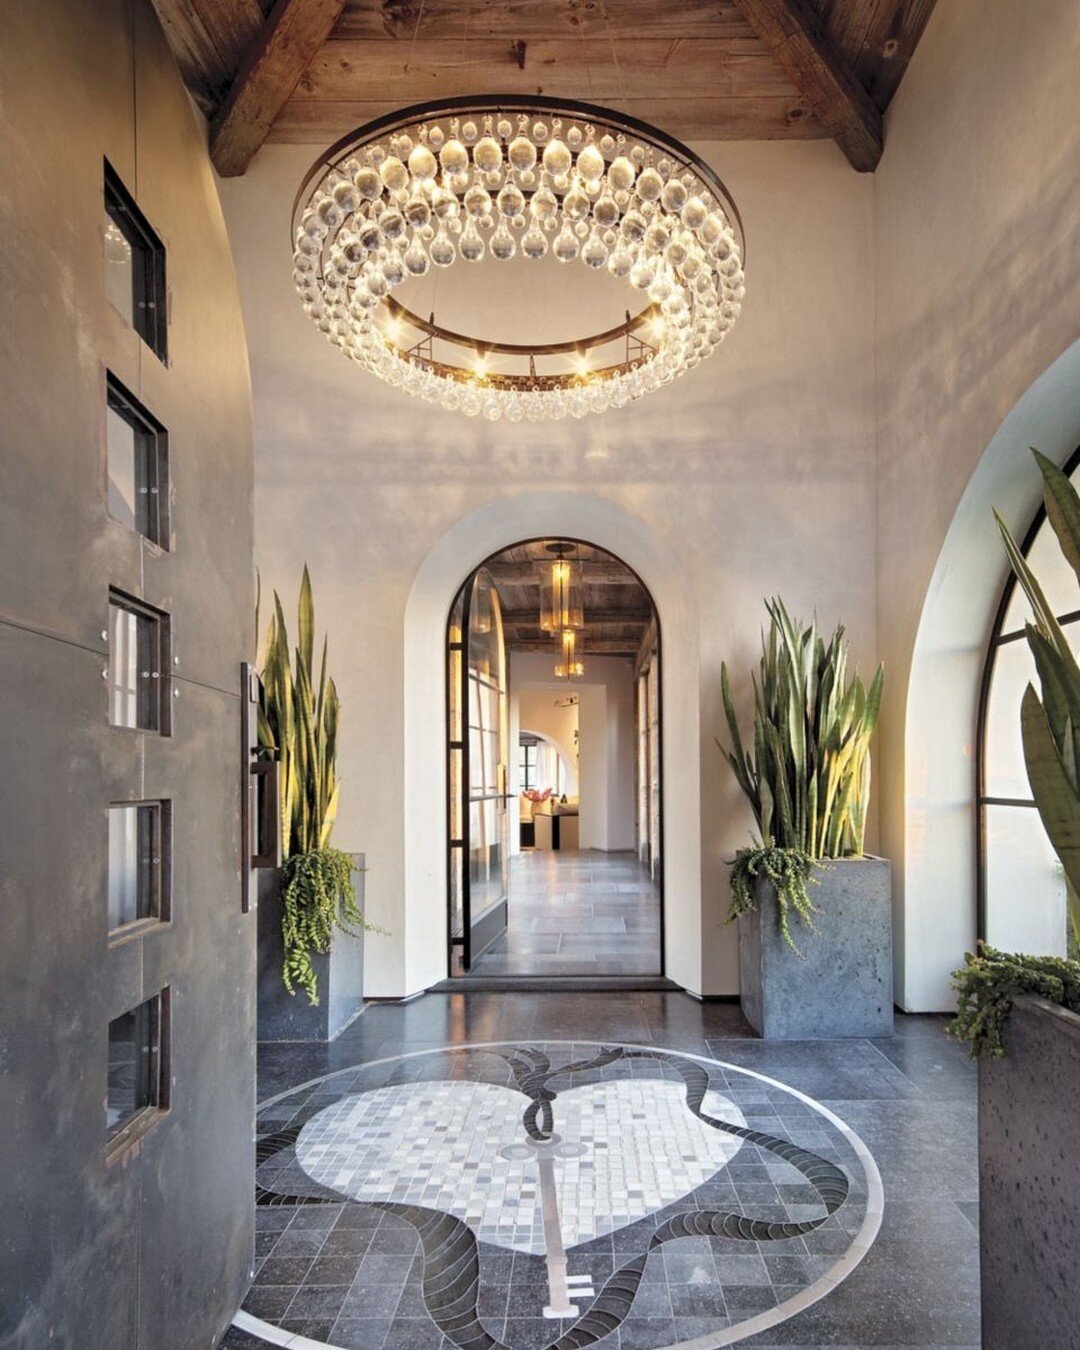 Welcome home! xo
This Foyer, as published by Luxe Magazine, highlights the versatility of Belgian Bluestone. Here, the custom inlayed stone floor design features a key, a ribbon and a heart: a not-so-subtle message of love! Superb craftsmanship draws